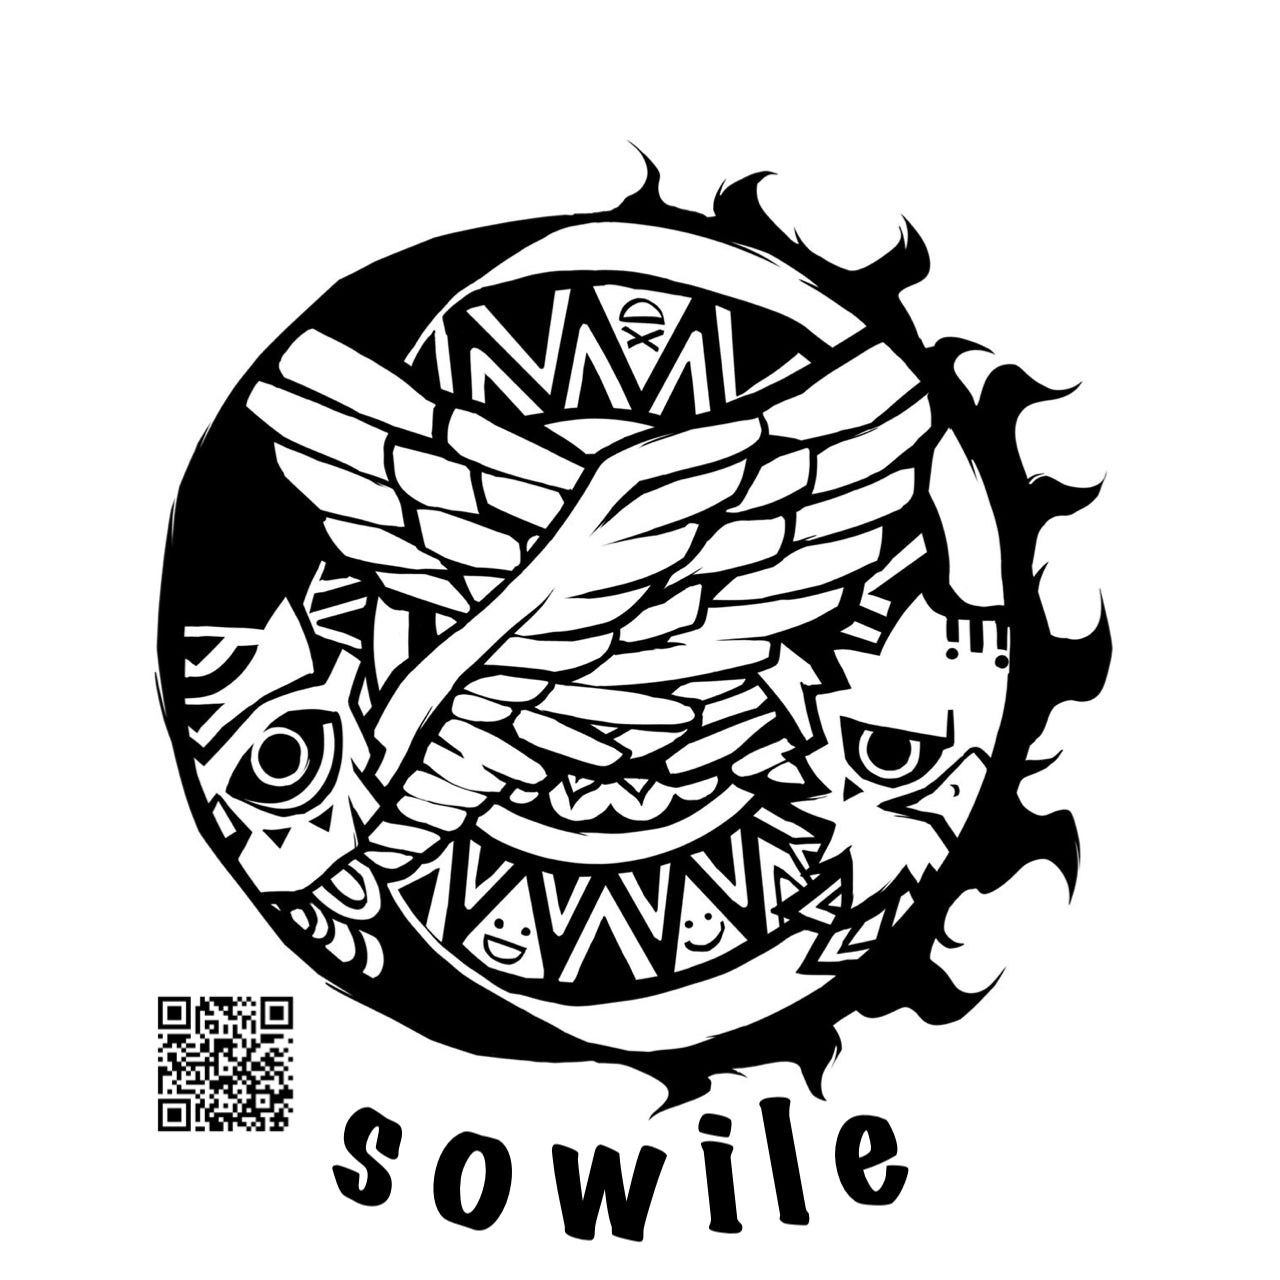 sowile ステッカー